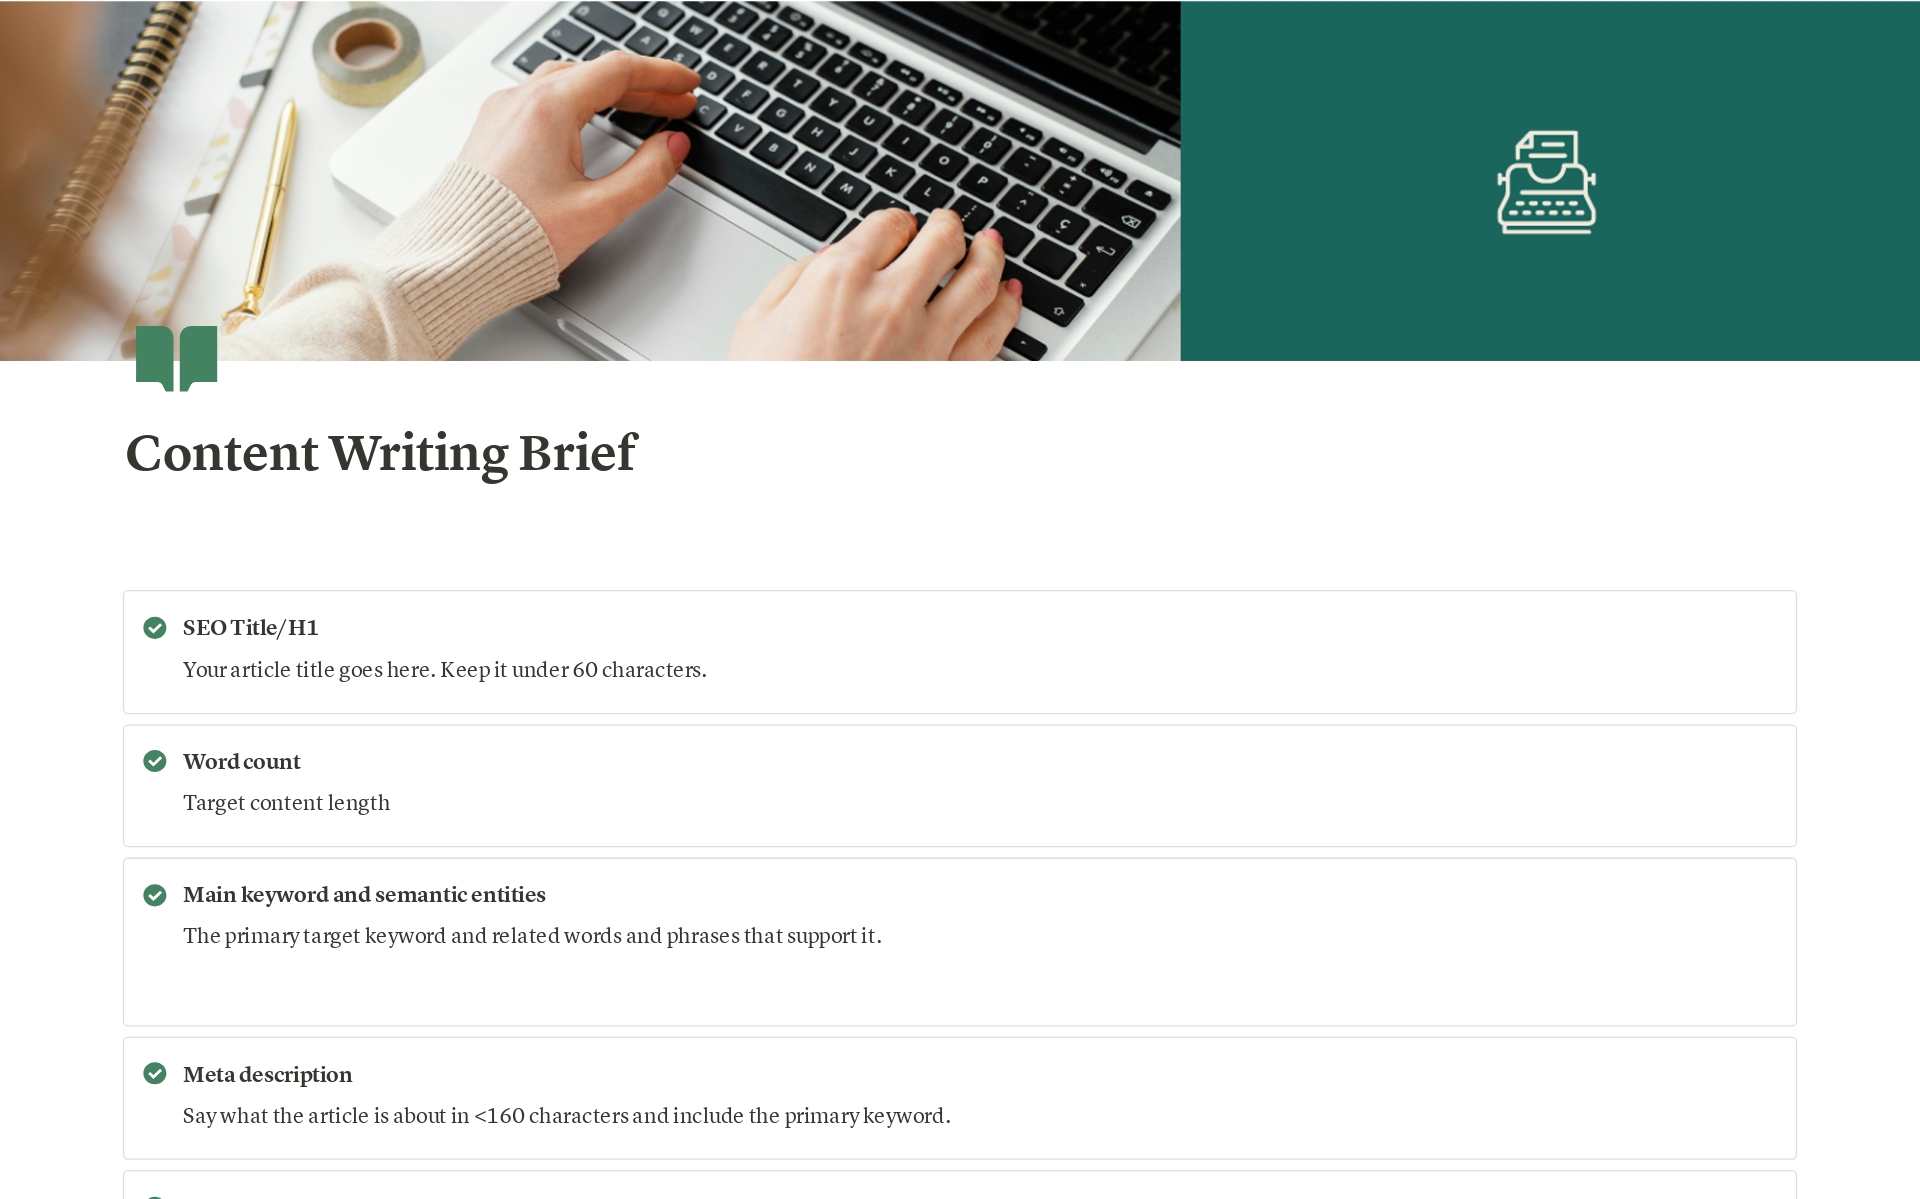 A simple template for your content writing brief!

Who is this for?

- You are an online writer and you love Notion
- You want a straightforward template to share with your client
- You want room for customization